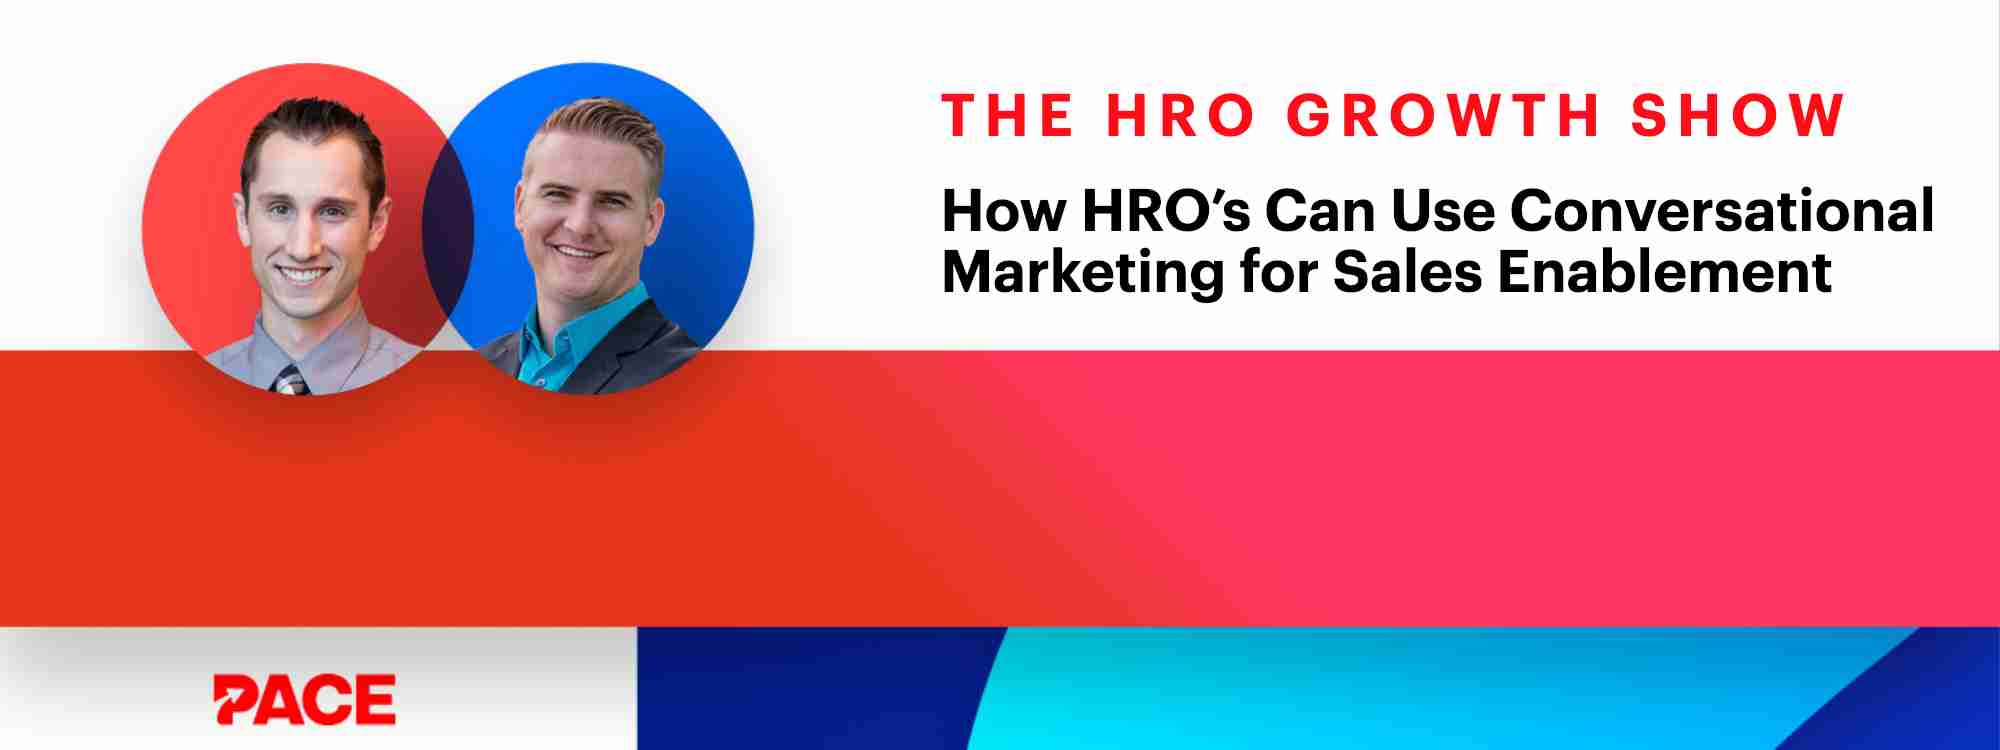 HRO Growth Show | How HRO’s Can Use Conversational Marketing for Sales Enablement | Episode #2